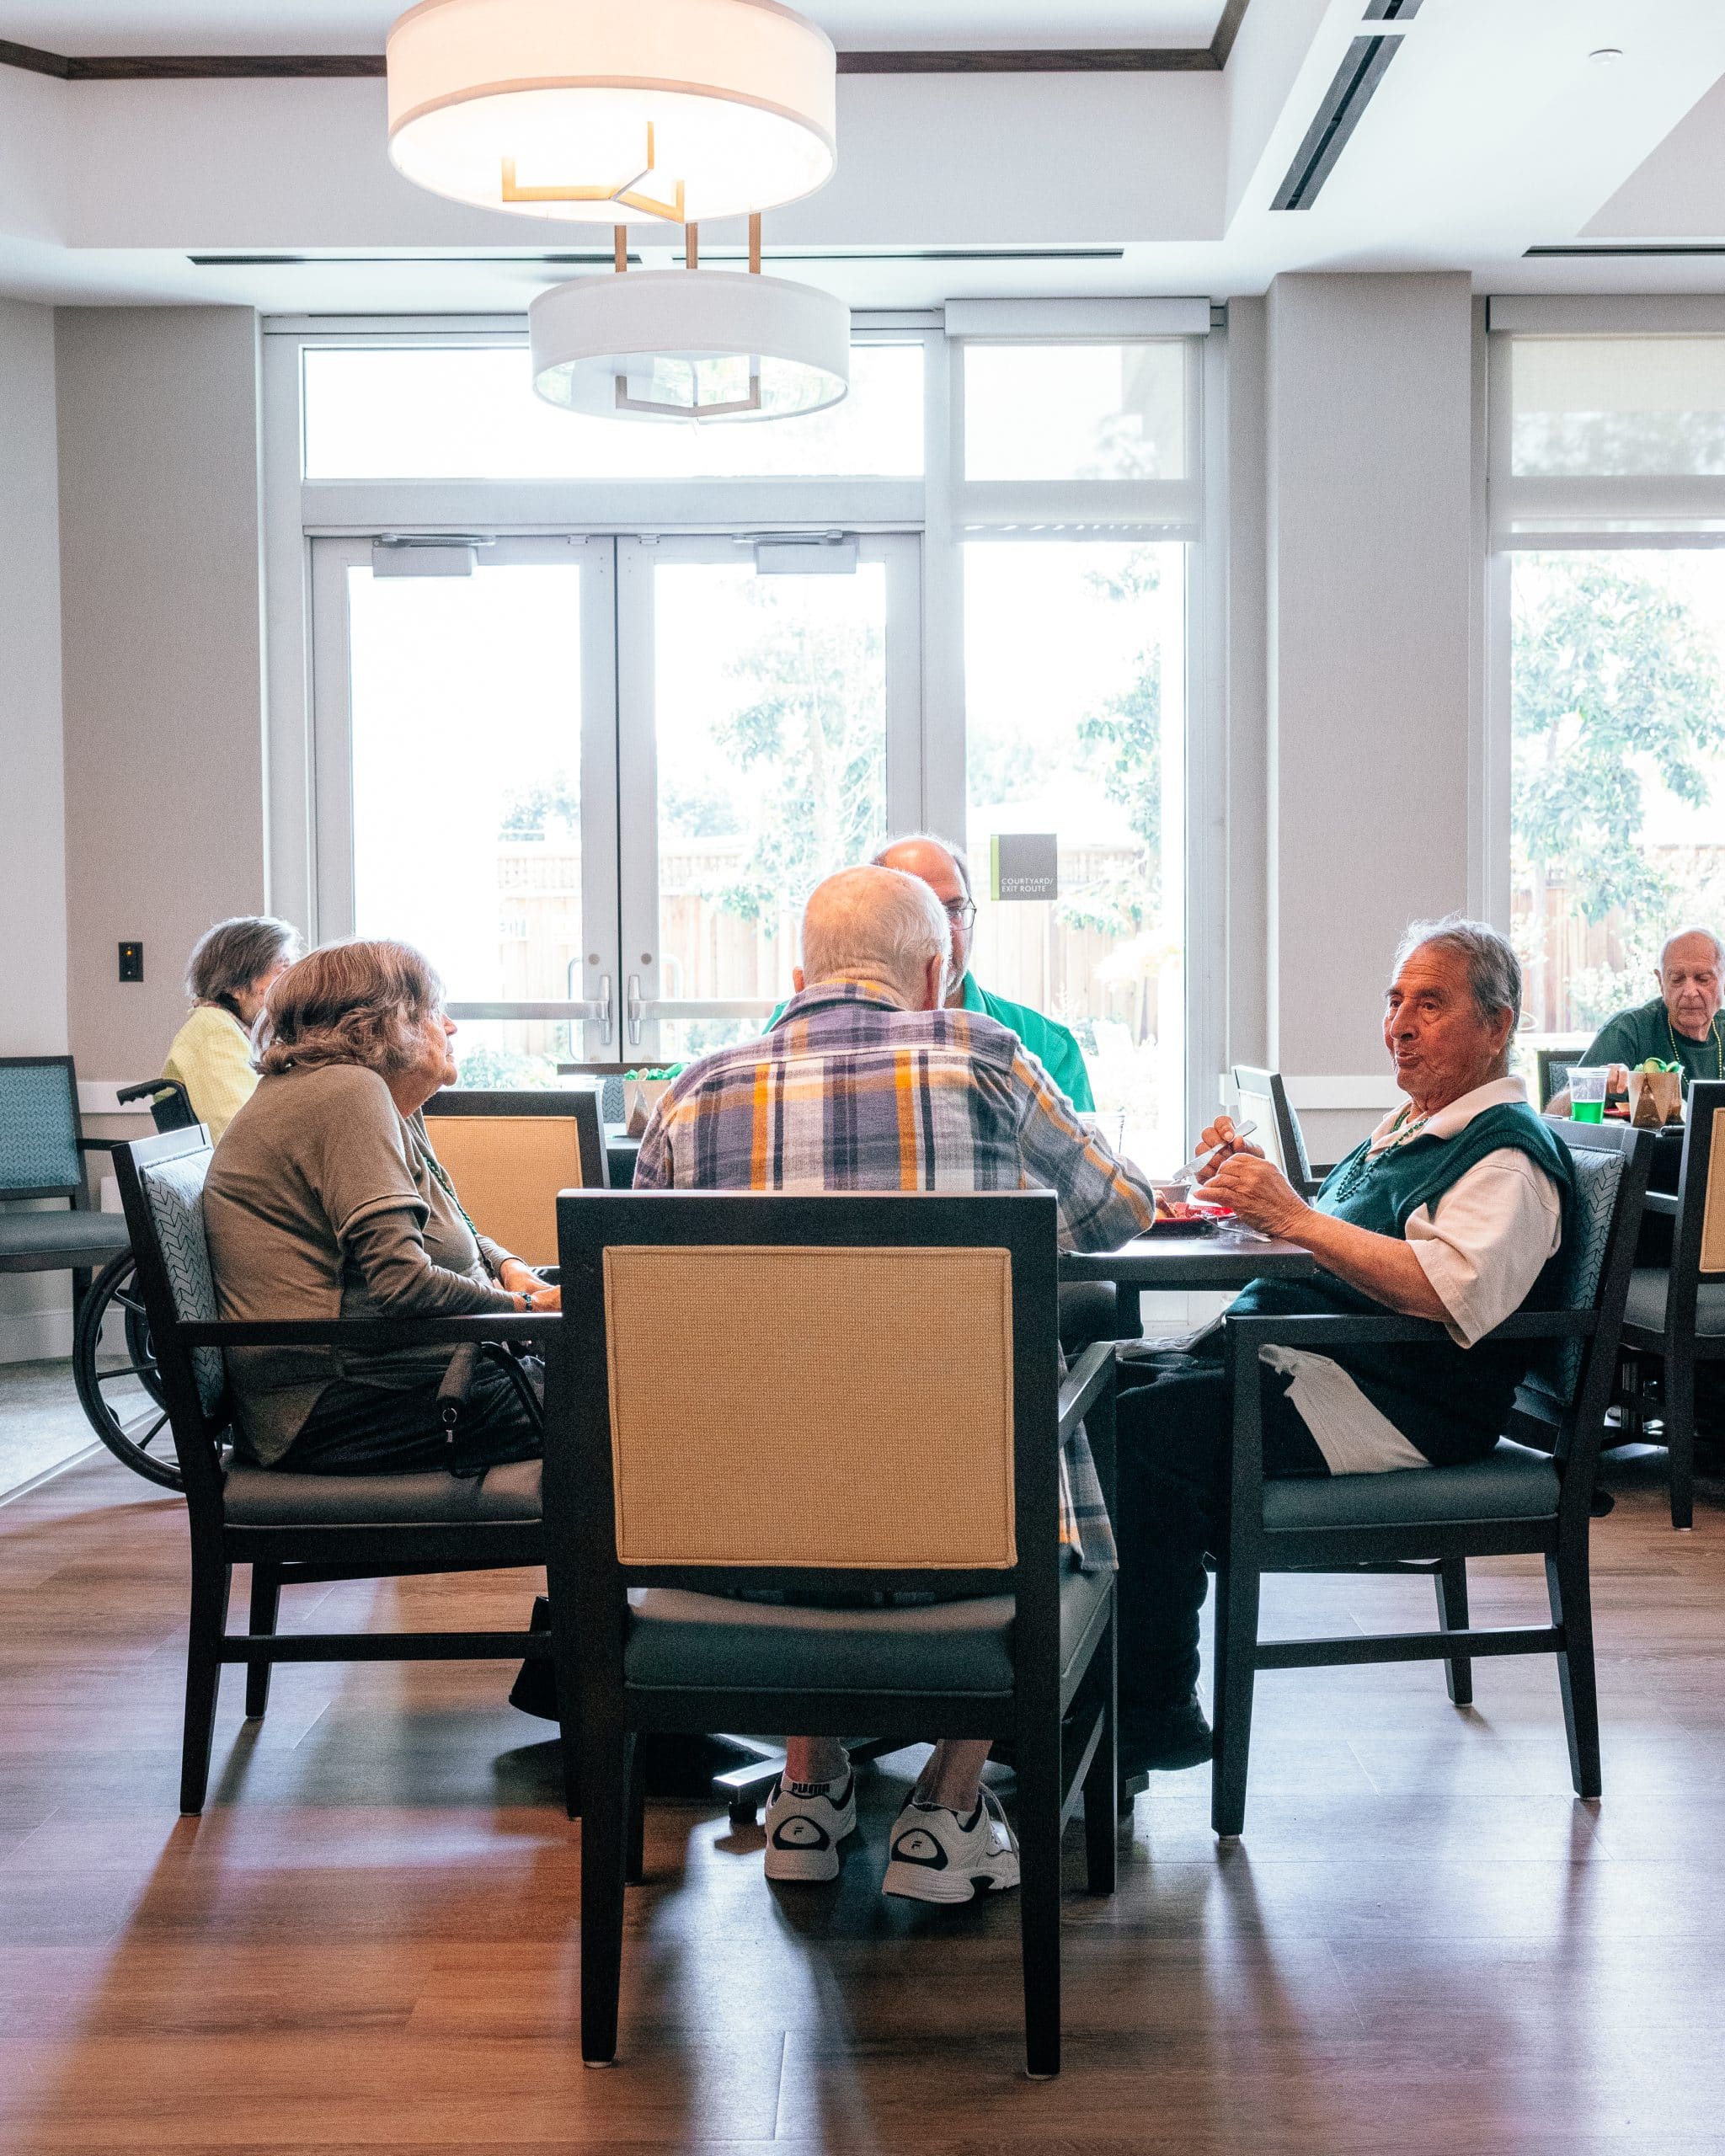 FAQ: When is it time to consider Sonnet Hill Senior Living?